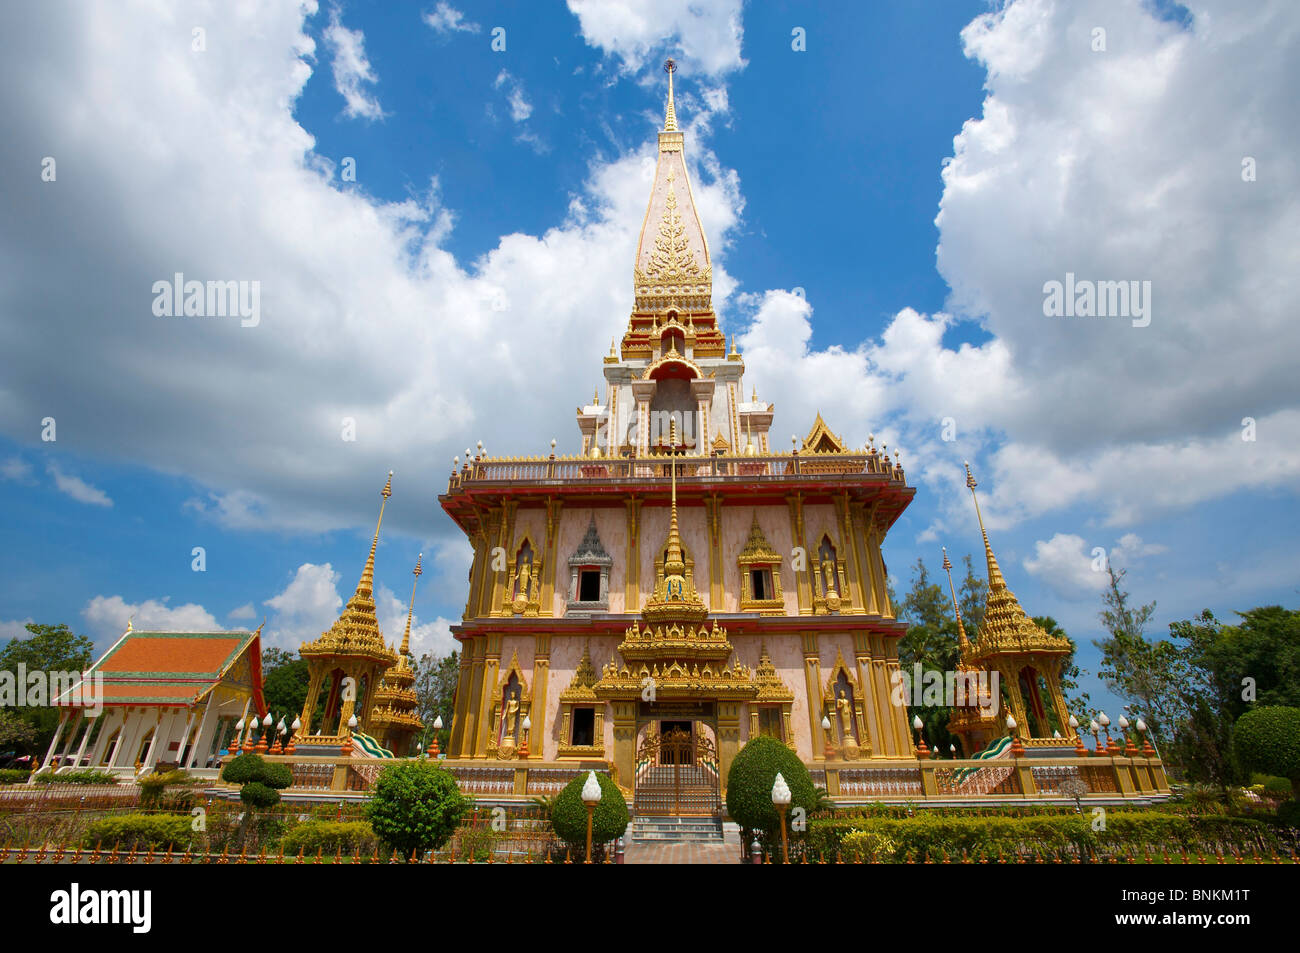 Asia Asian island isle islands isles Phuket South-East Asia Thailand temple architecture architecture building buildings Stock Photo